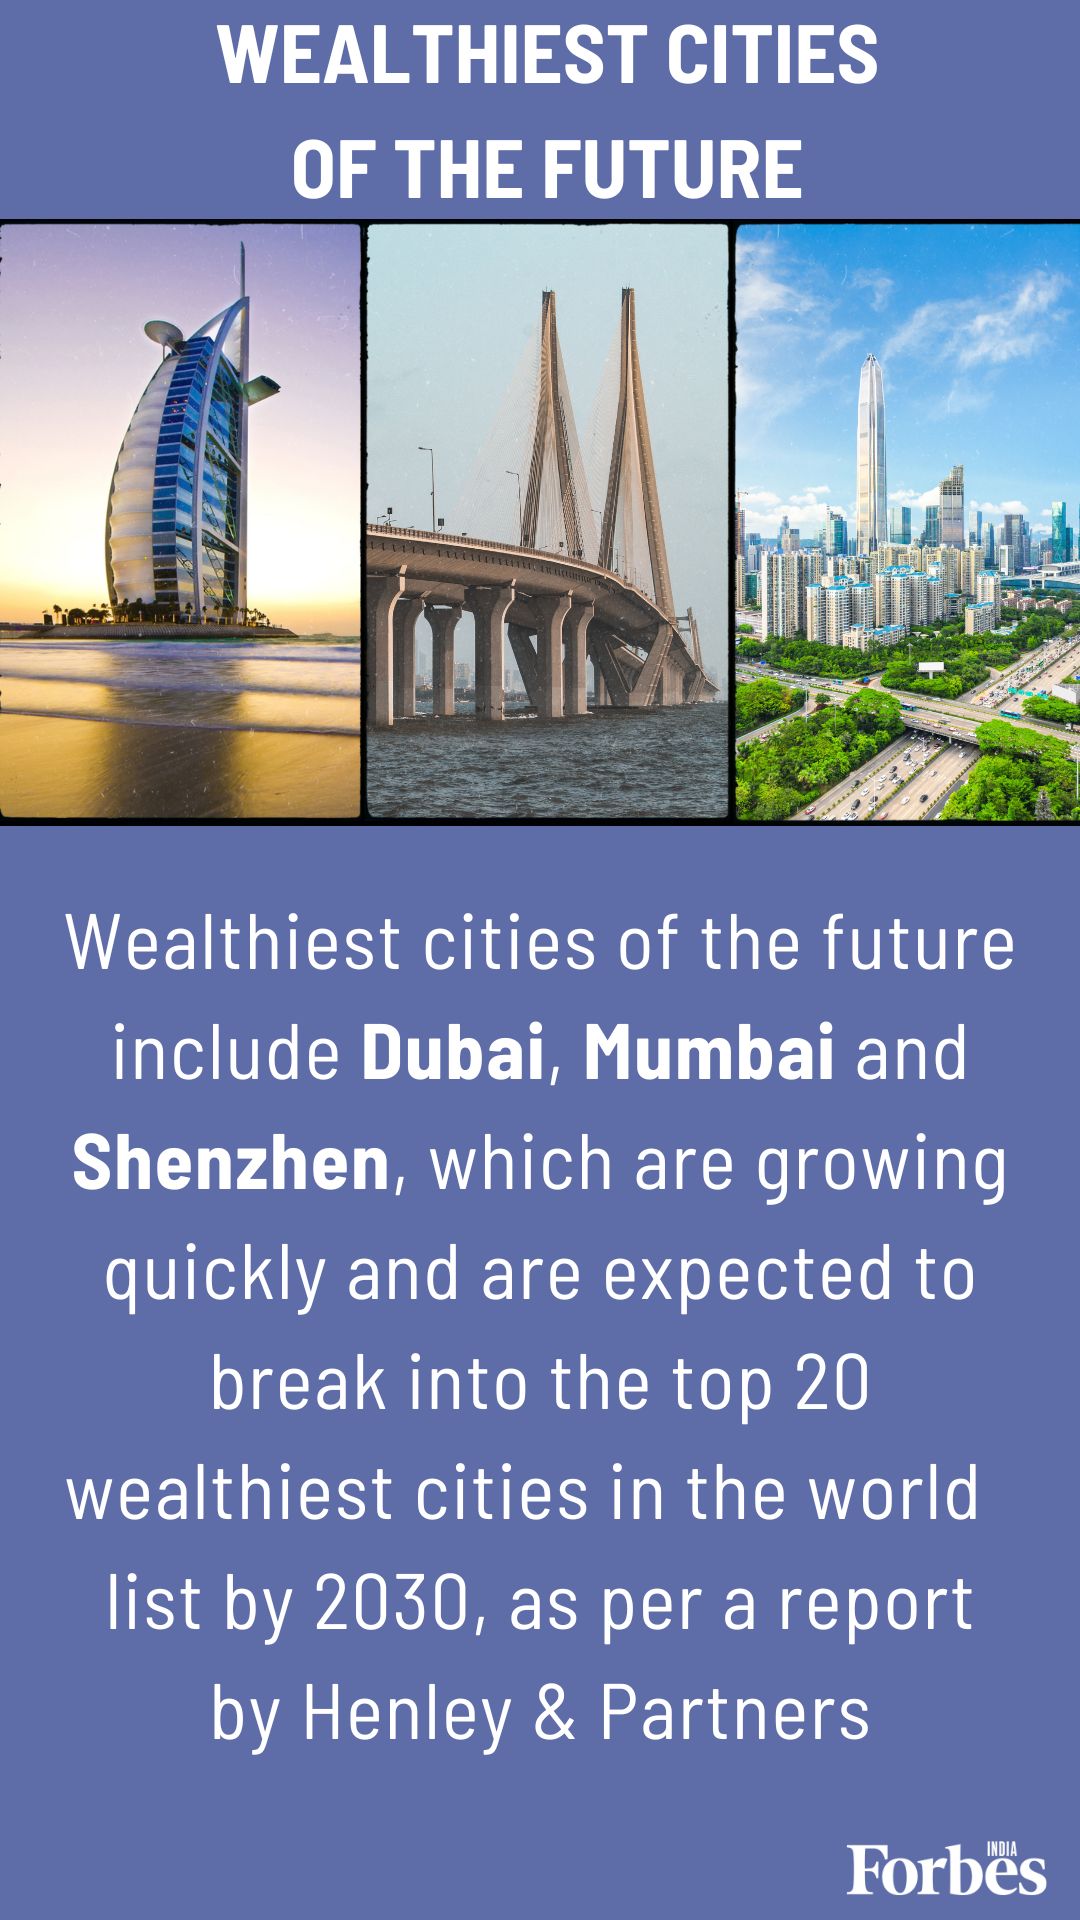 Mumbai likely to be one of the wealthiest cities in the world by 2030: report